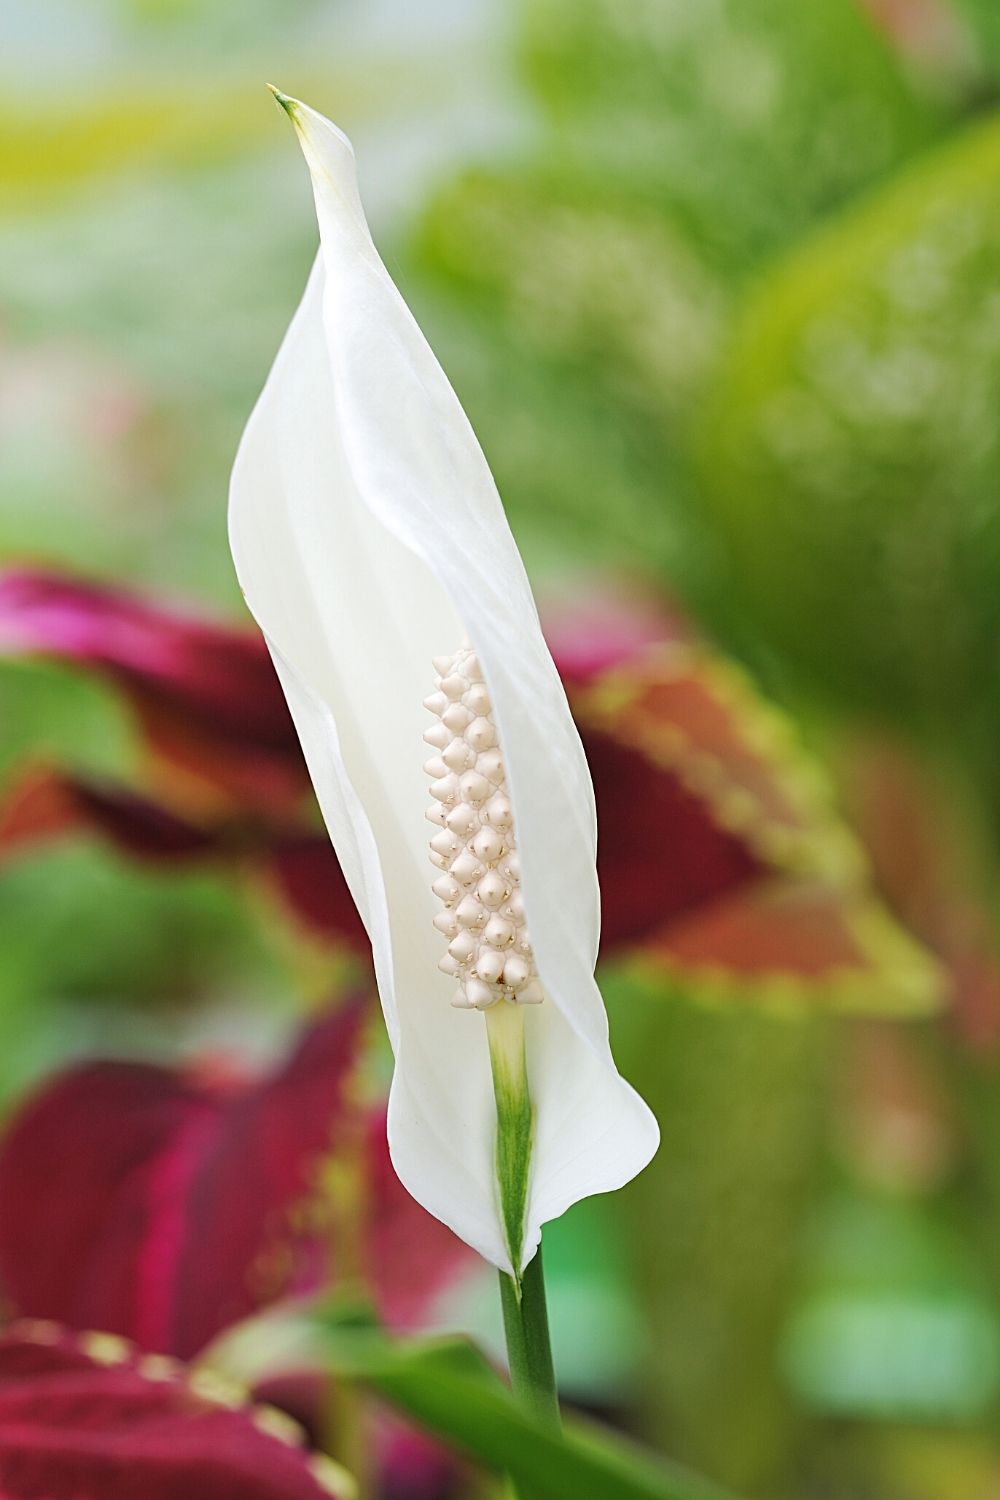 If you're growing Peace Lily for your betta fish, make sure there's an open space or cavity 